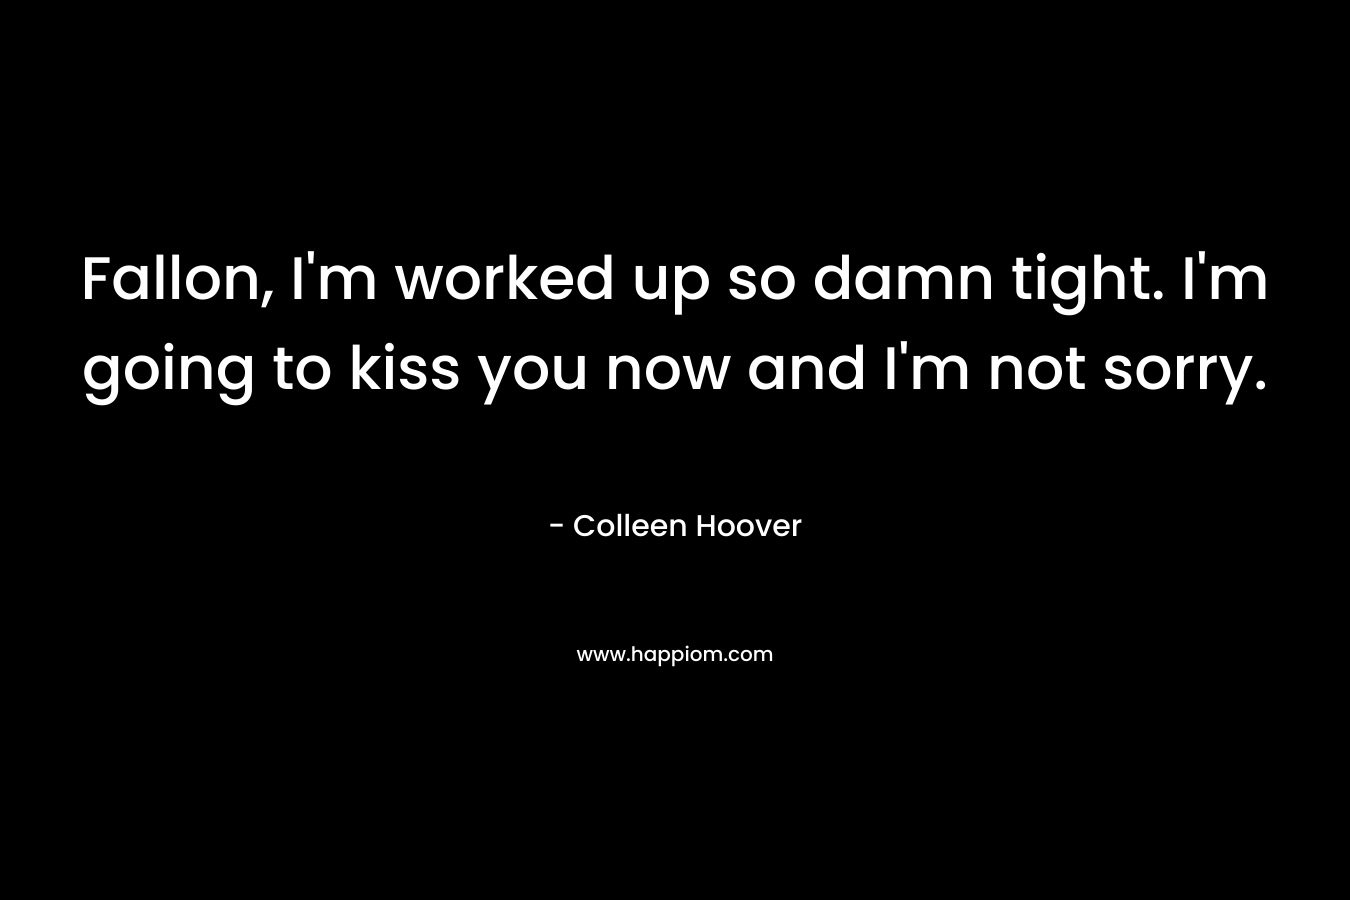 Fallon, I’m worked up so damn tight. I’m going to kiss you now and I’m not sorry. – Colleen Hoover